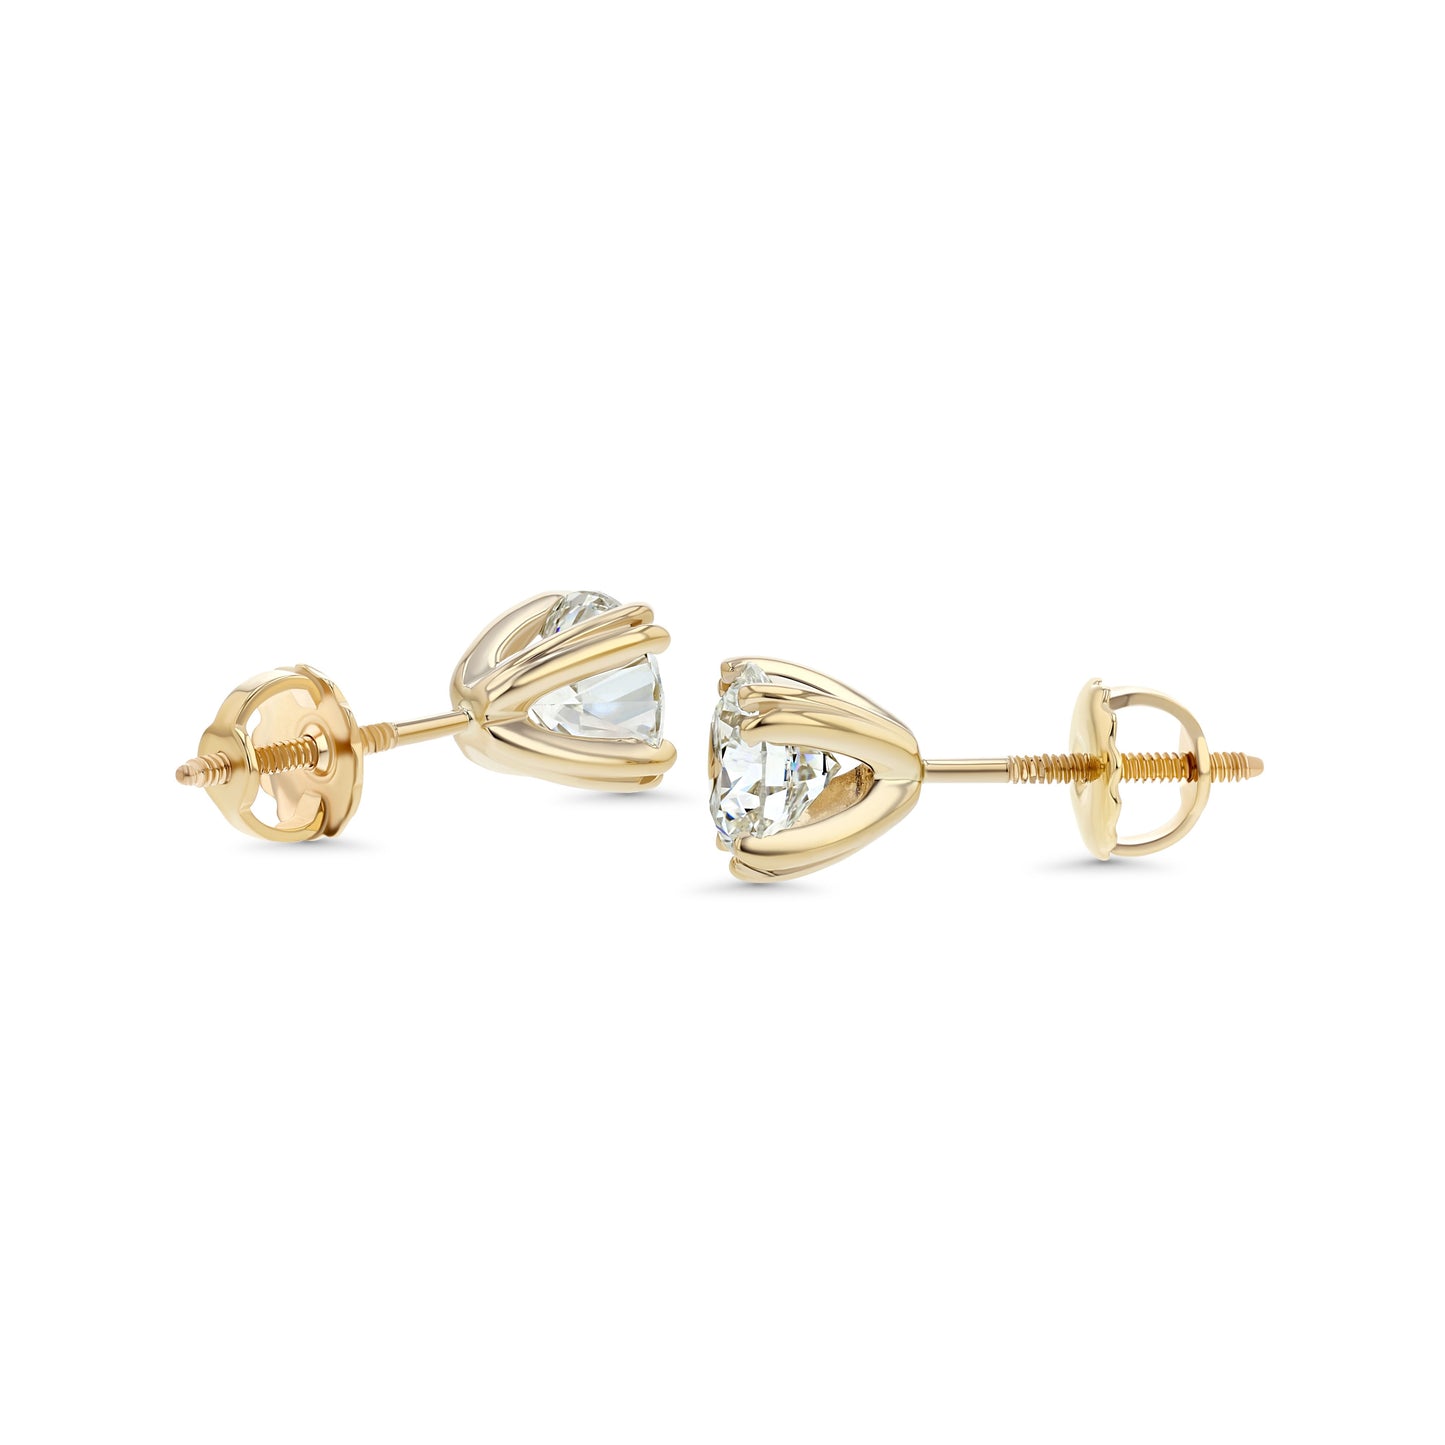 14k Yellow Gold Double Prong Round Diamond Stud Earrings 1ctw (5.2mm Ea), H Color, Si3-i1 Clarity